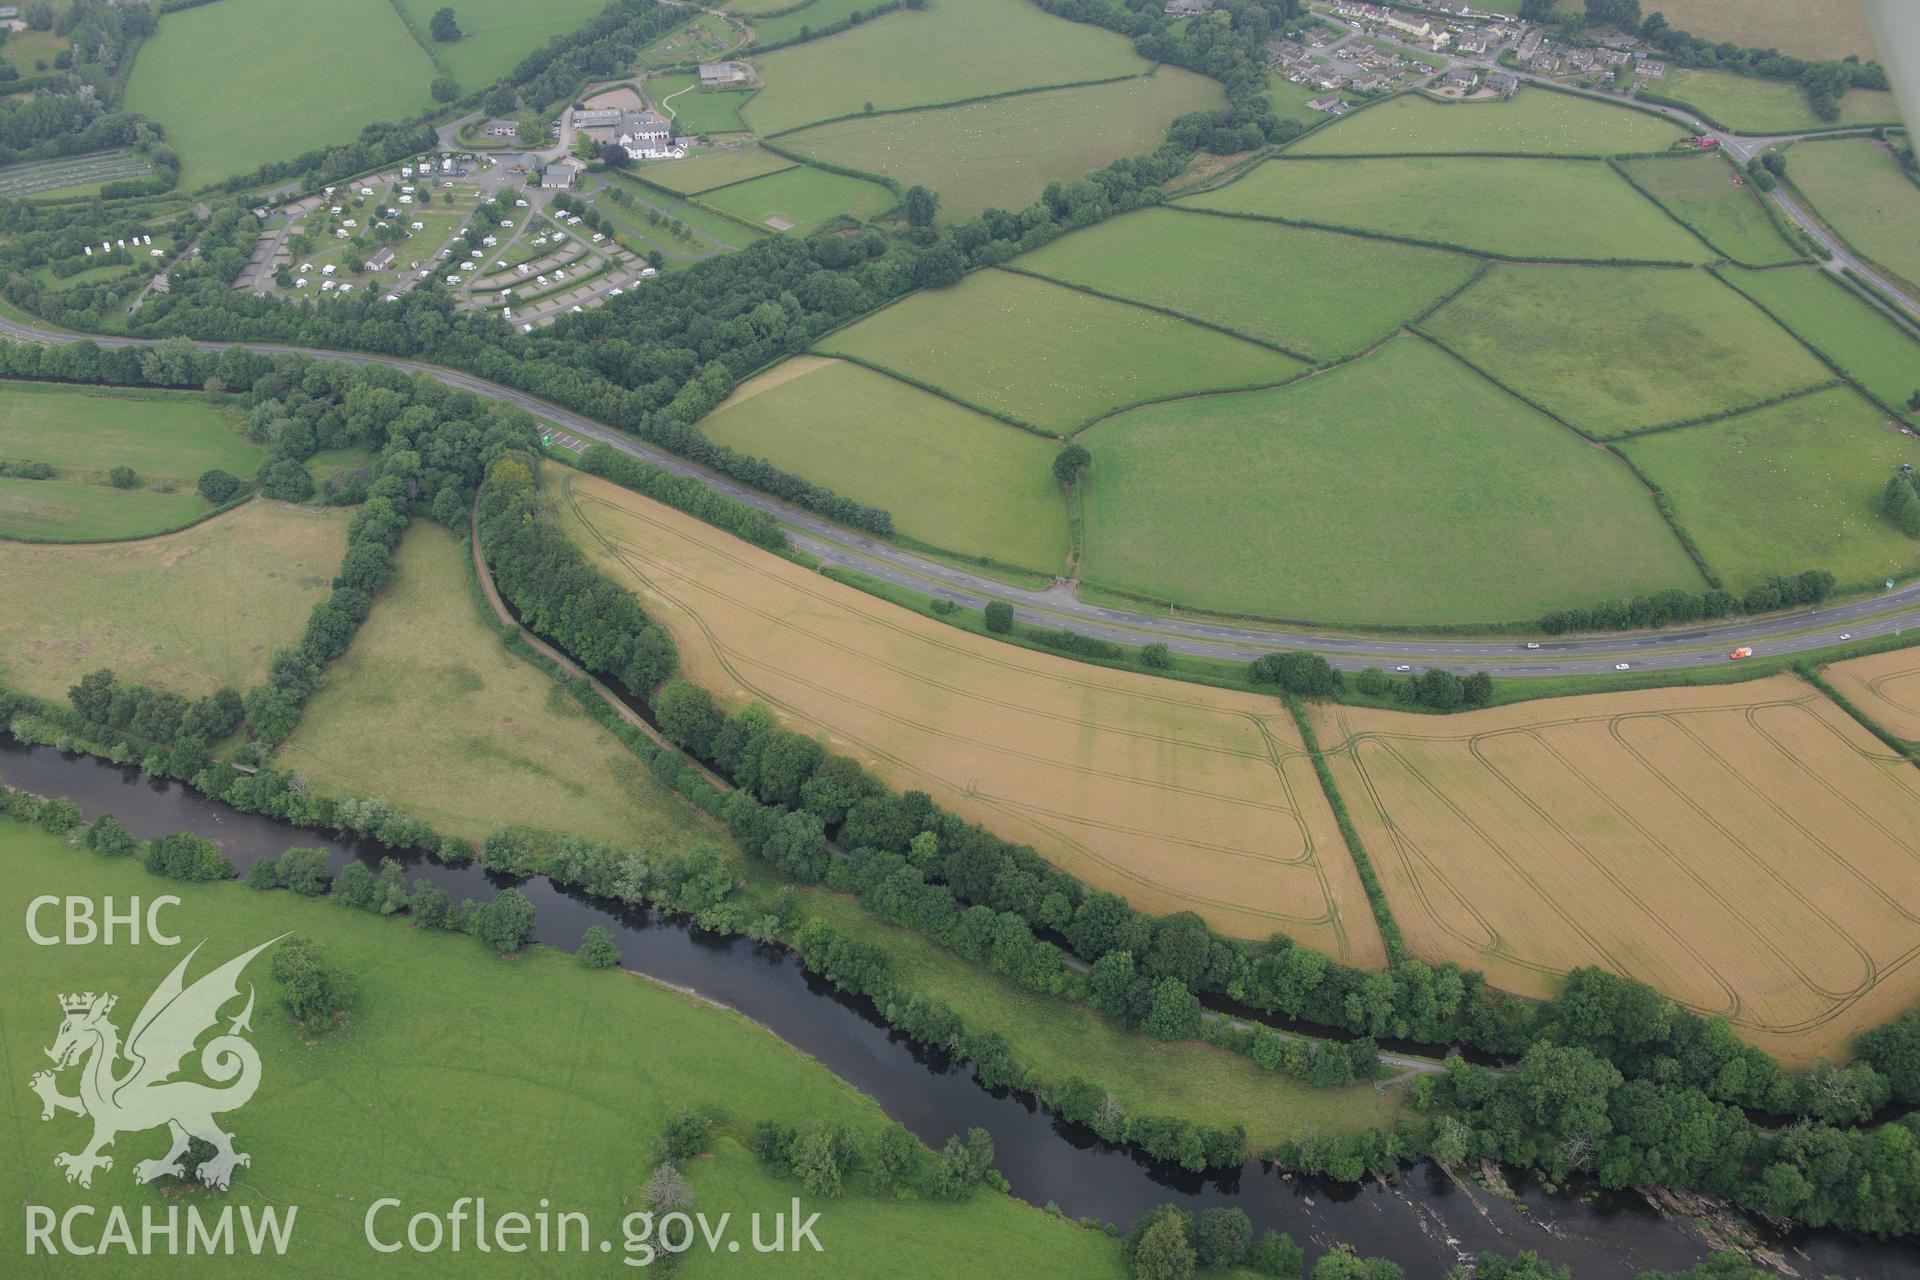 Cefn-brynich Roman fort, general view of cropmarks from south, taken by RCAHMW 1st August 2013.